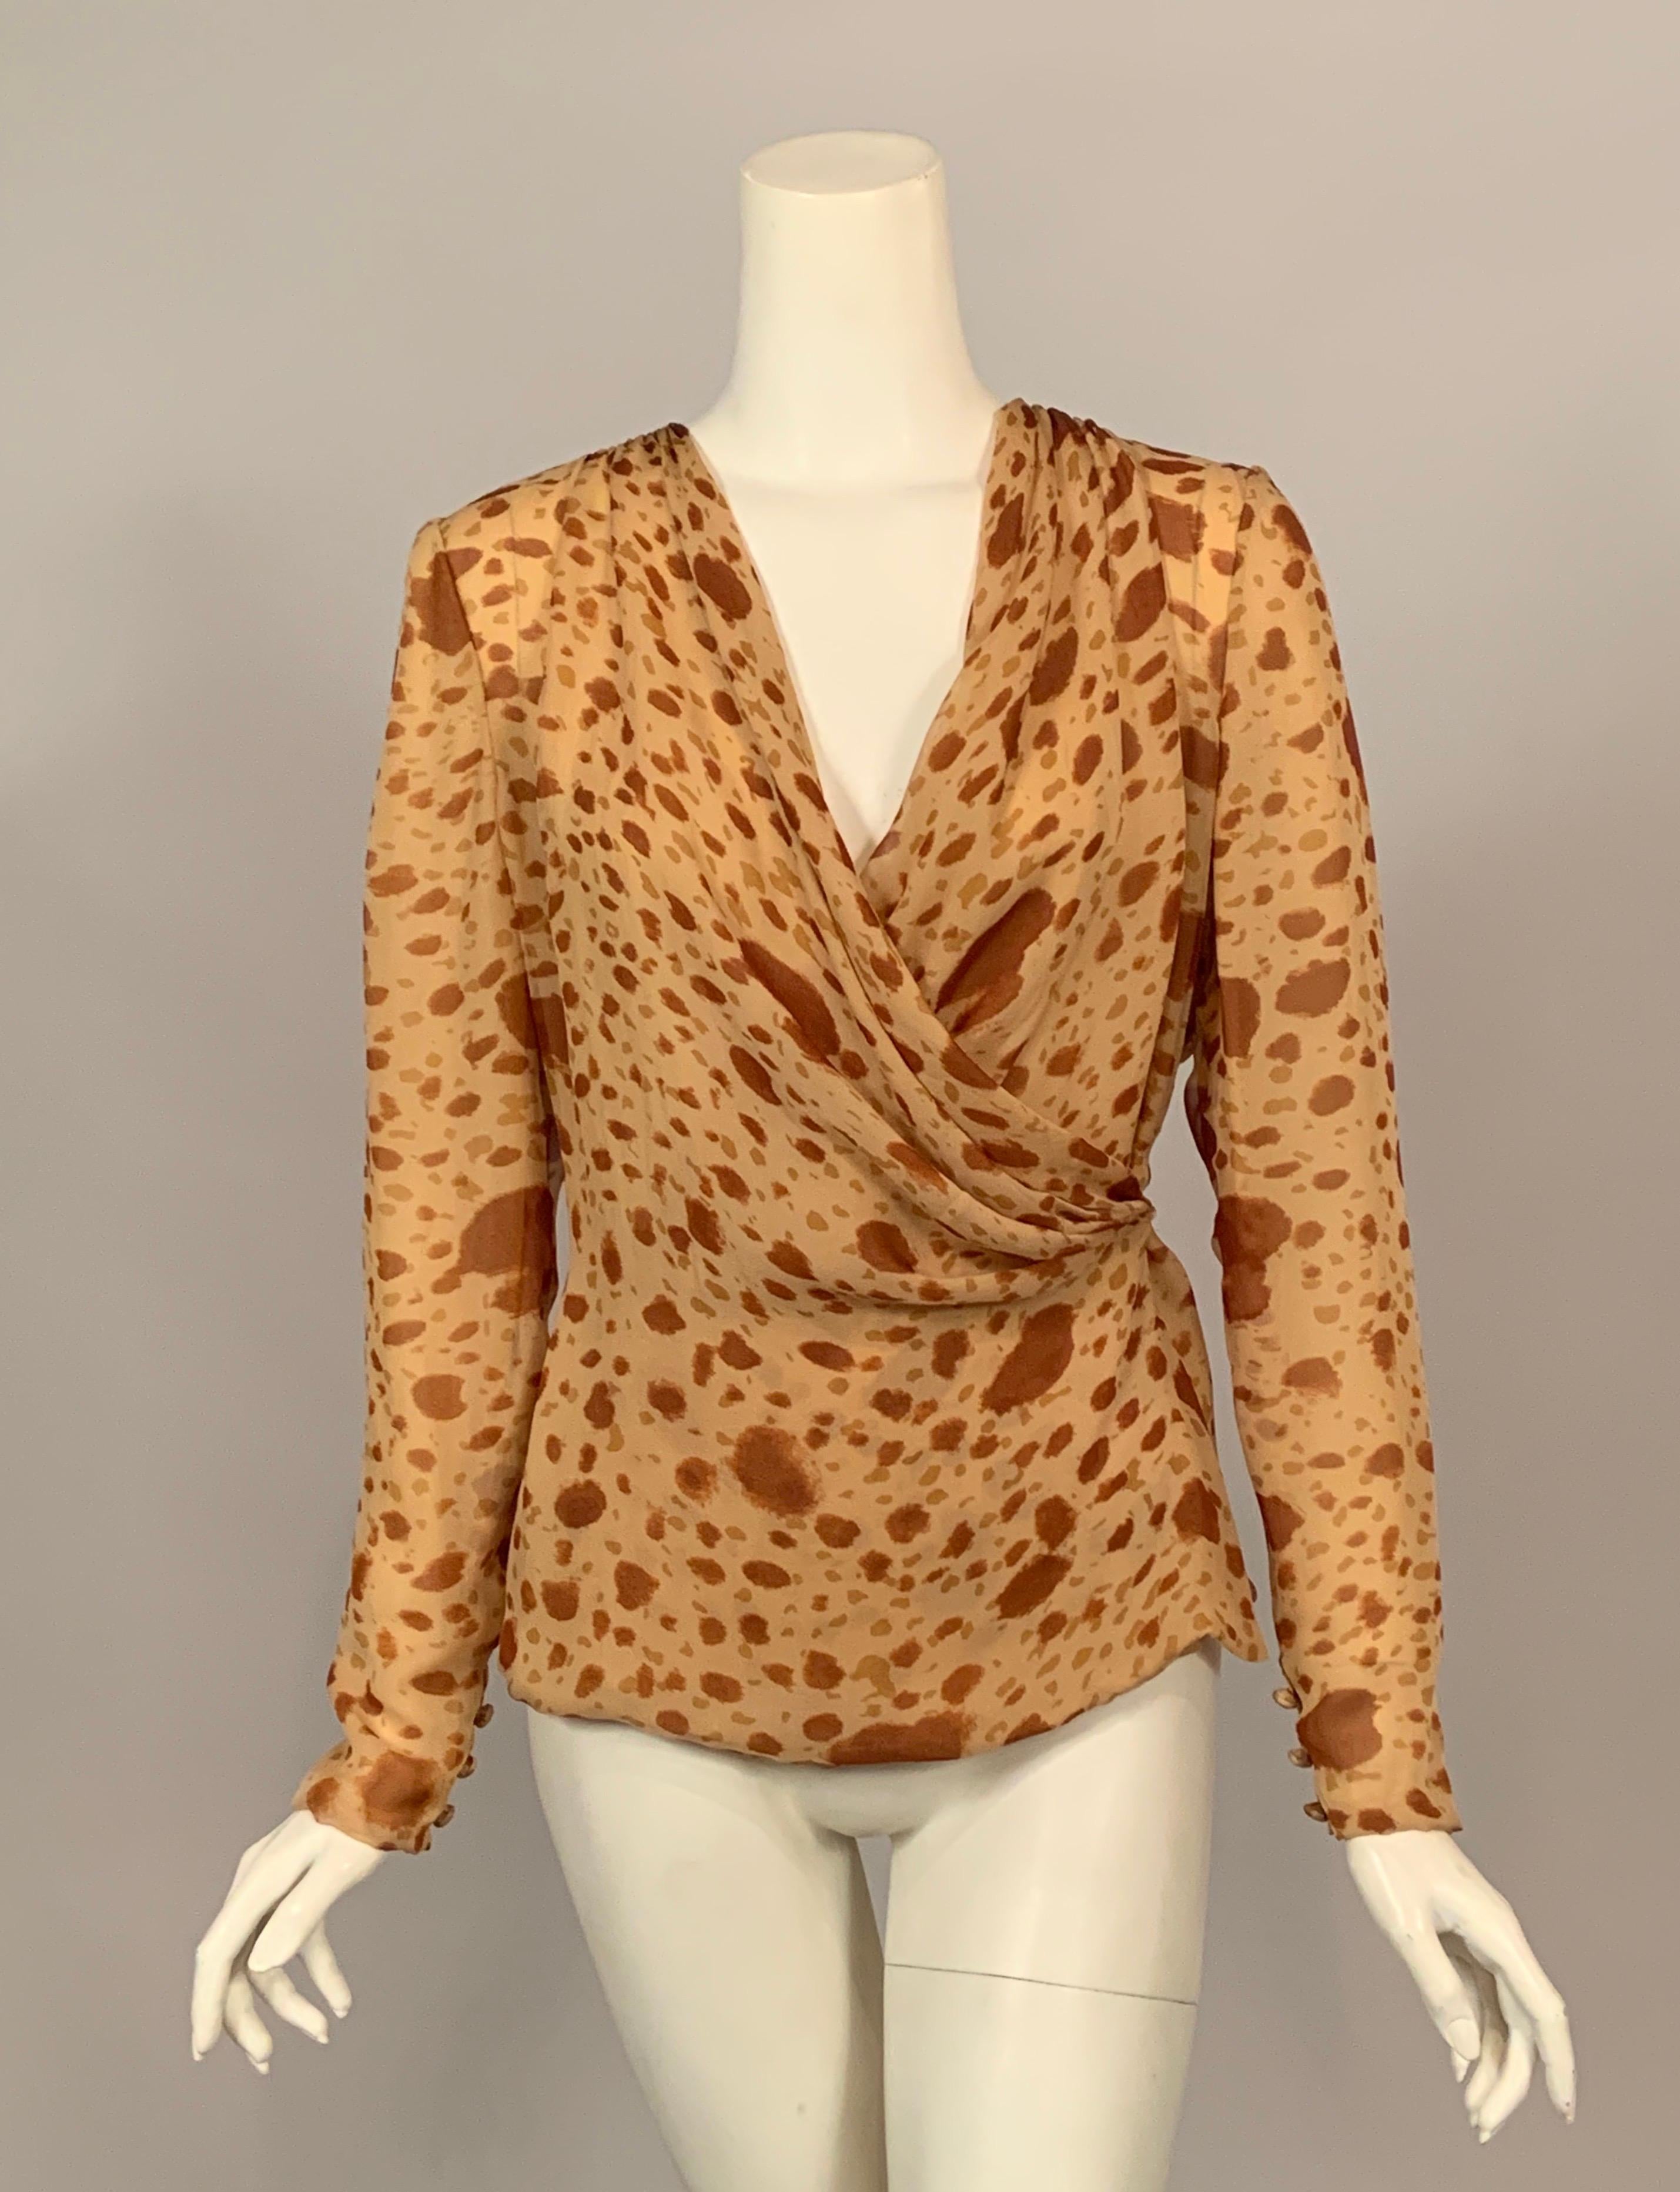 This is a great wrap blouse designed by Bill Blass with a spotted silk chiffon in shades of camel and lined with camel silk chiffon. It has a draped neckline with an interior button and snap closure. The long sleeves have three fabric covered